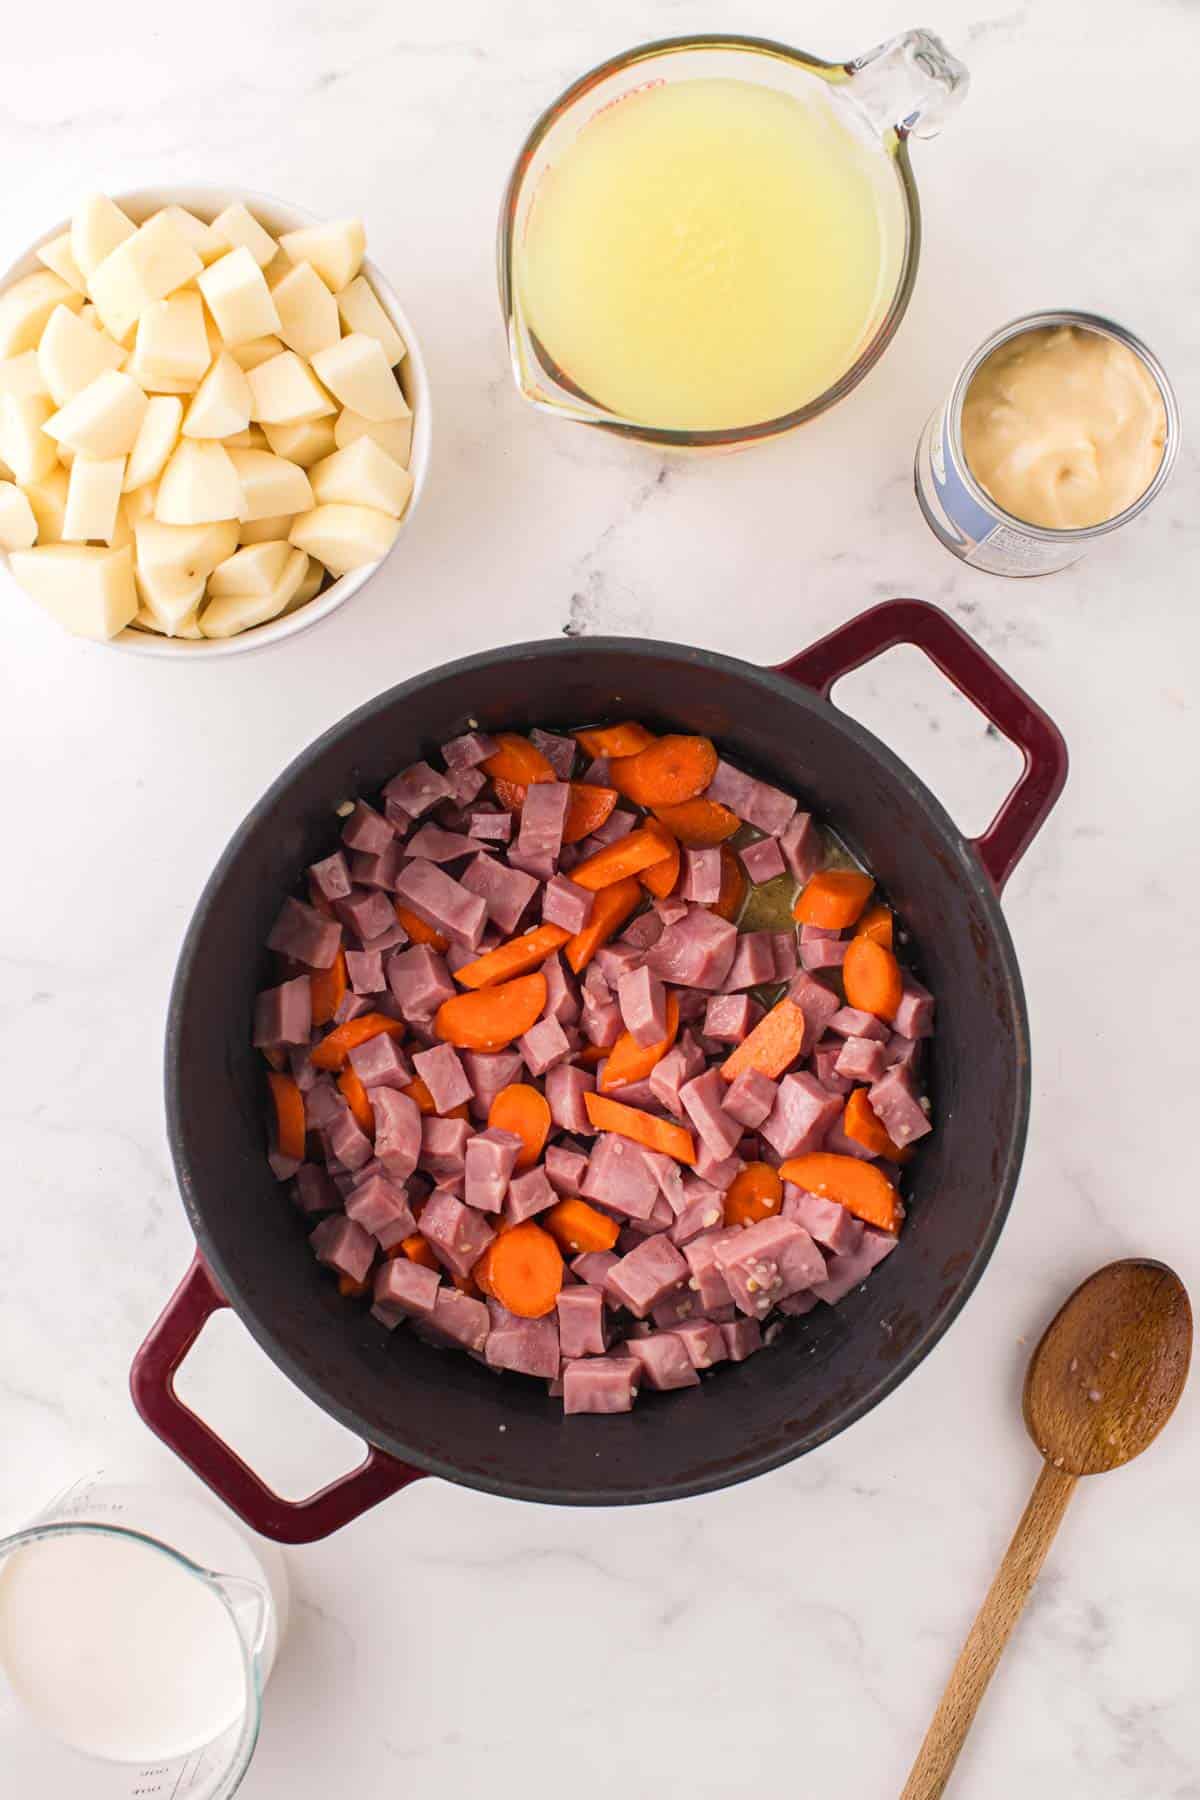 diced ham and carrots cooking in a pot